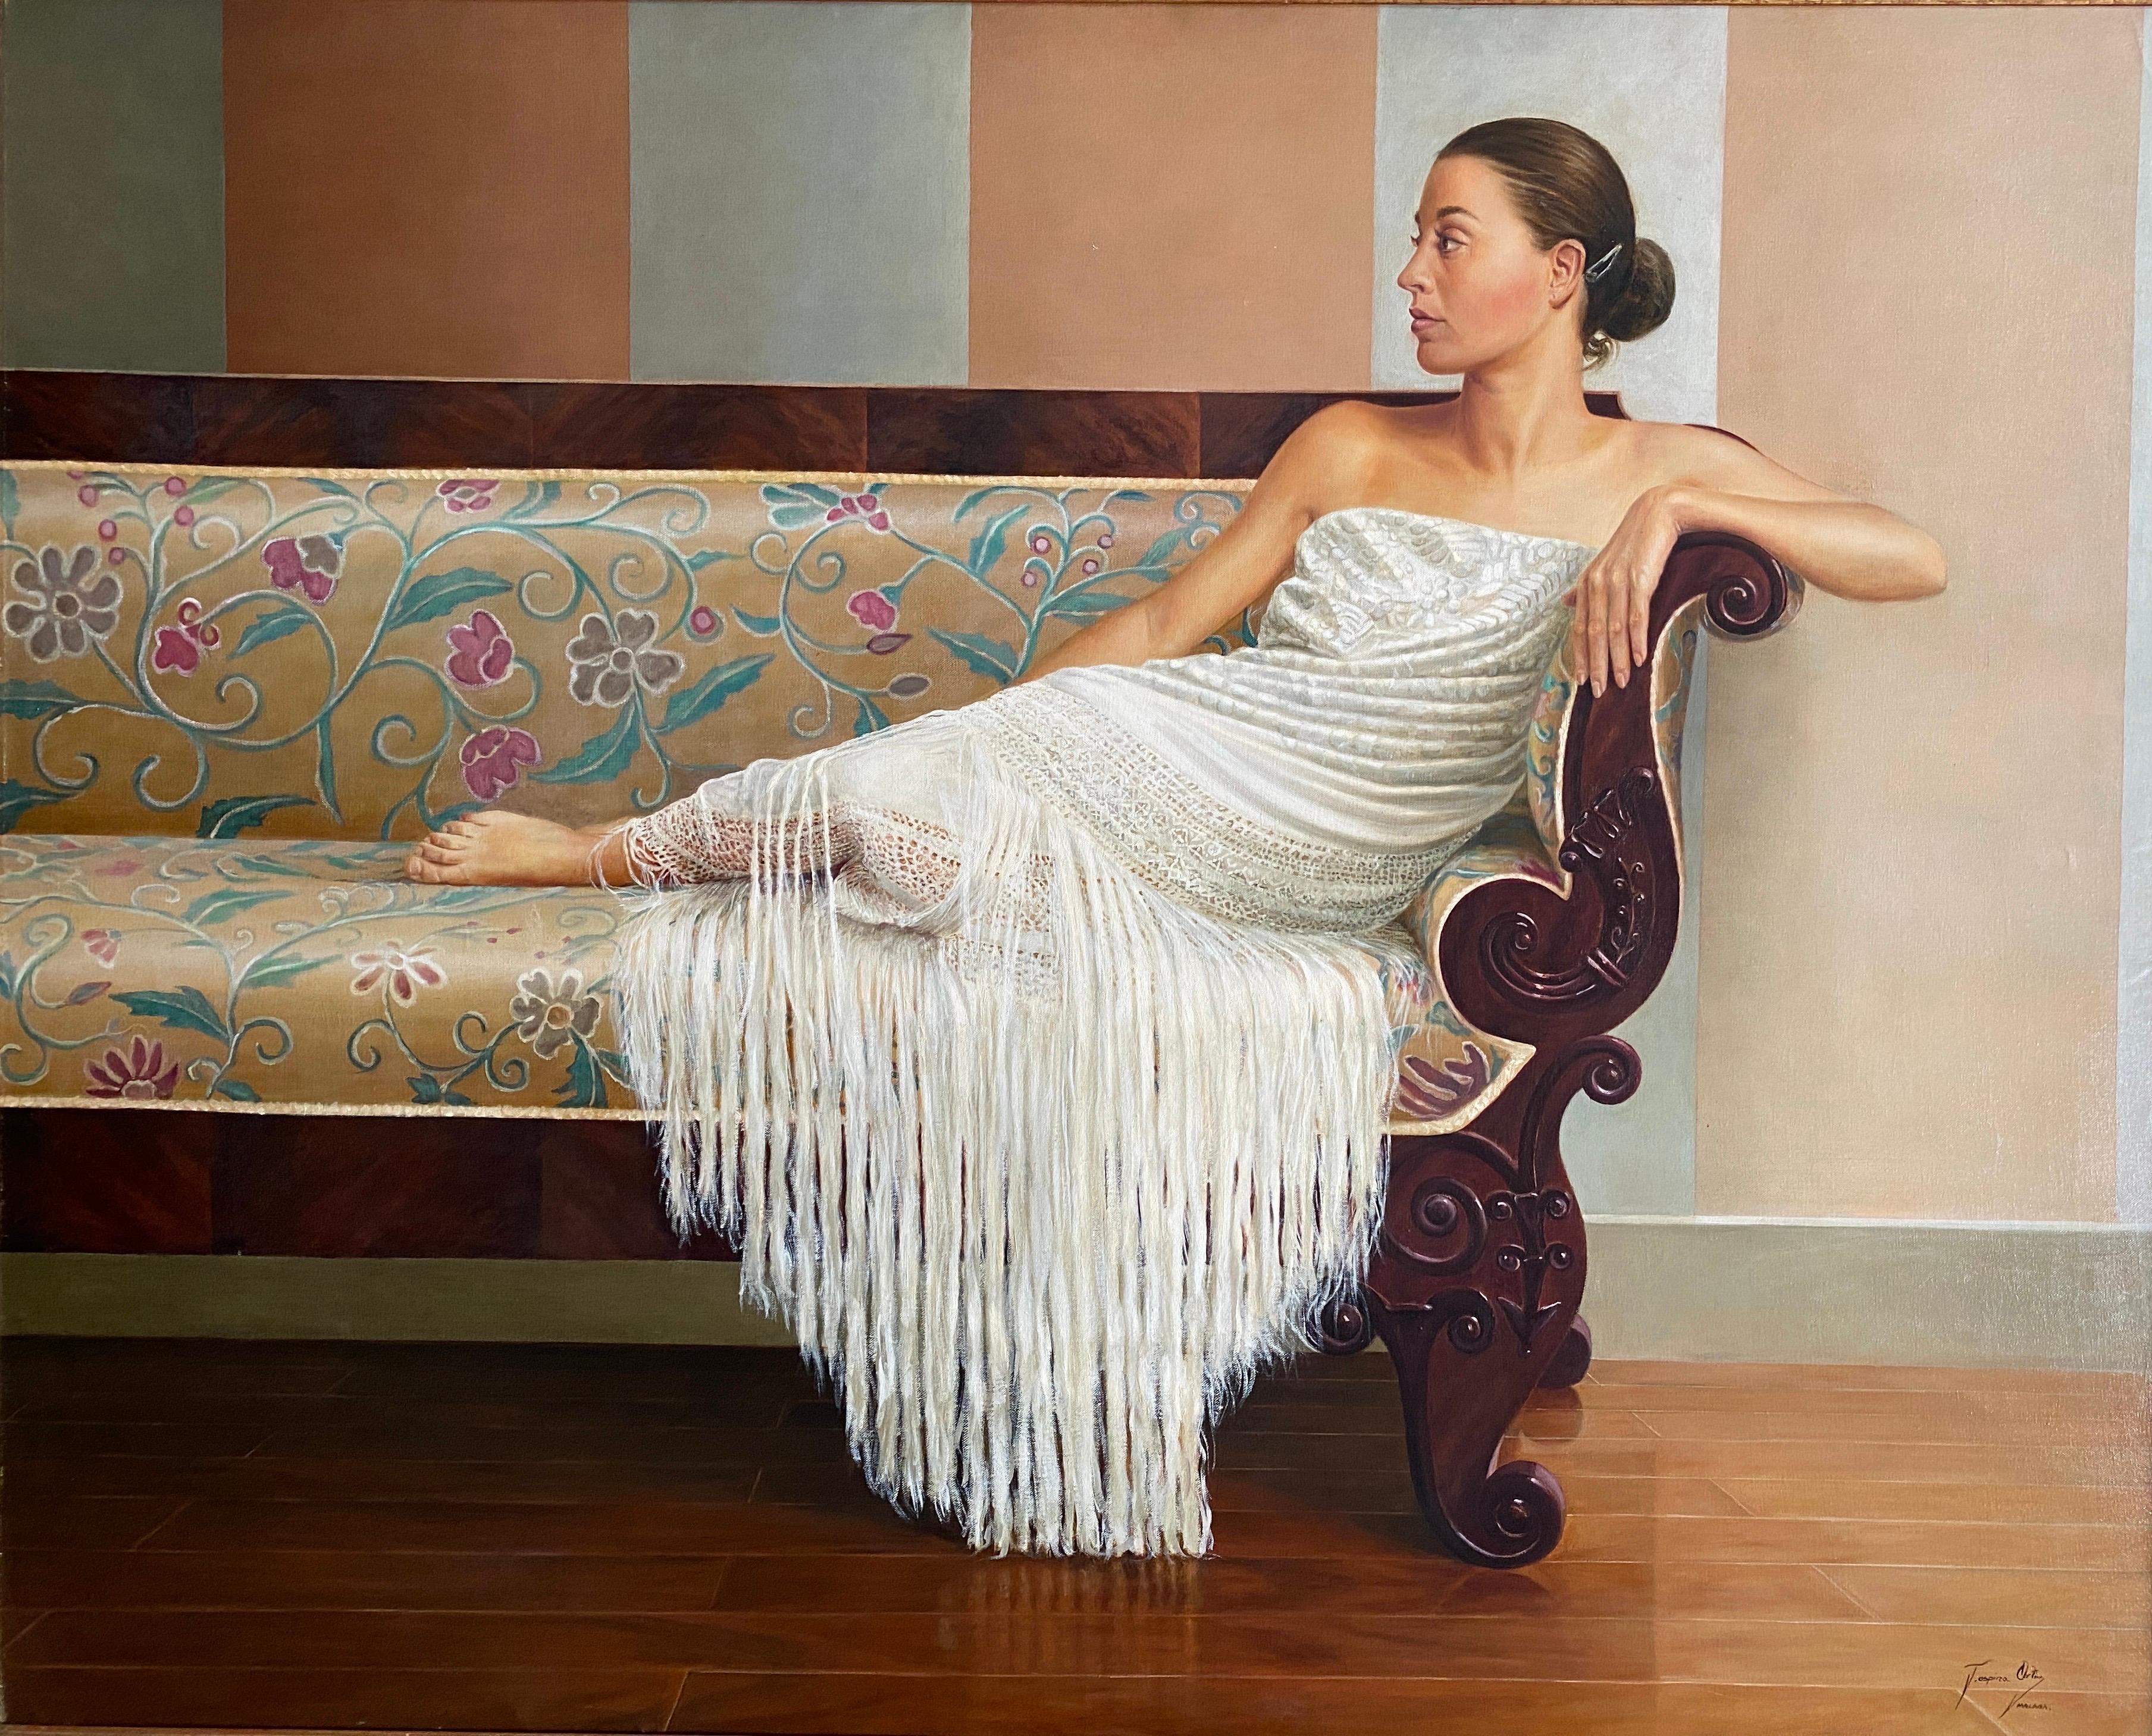 Serenity (Serenidad). Spanish Contemporary Figurative Realism. Oil on canvas - Realist Painting by Ospina Ortiz